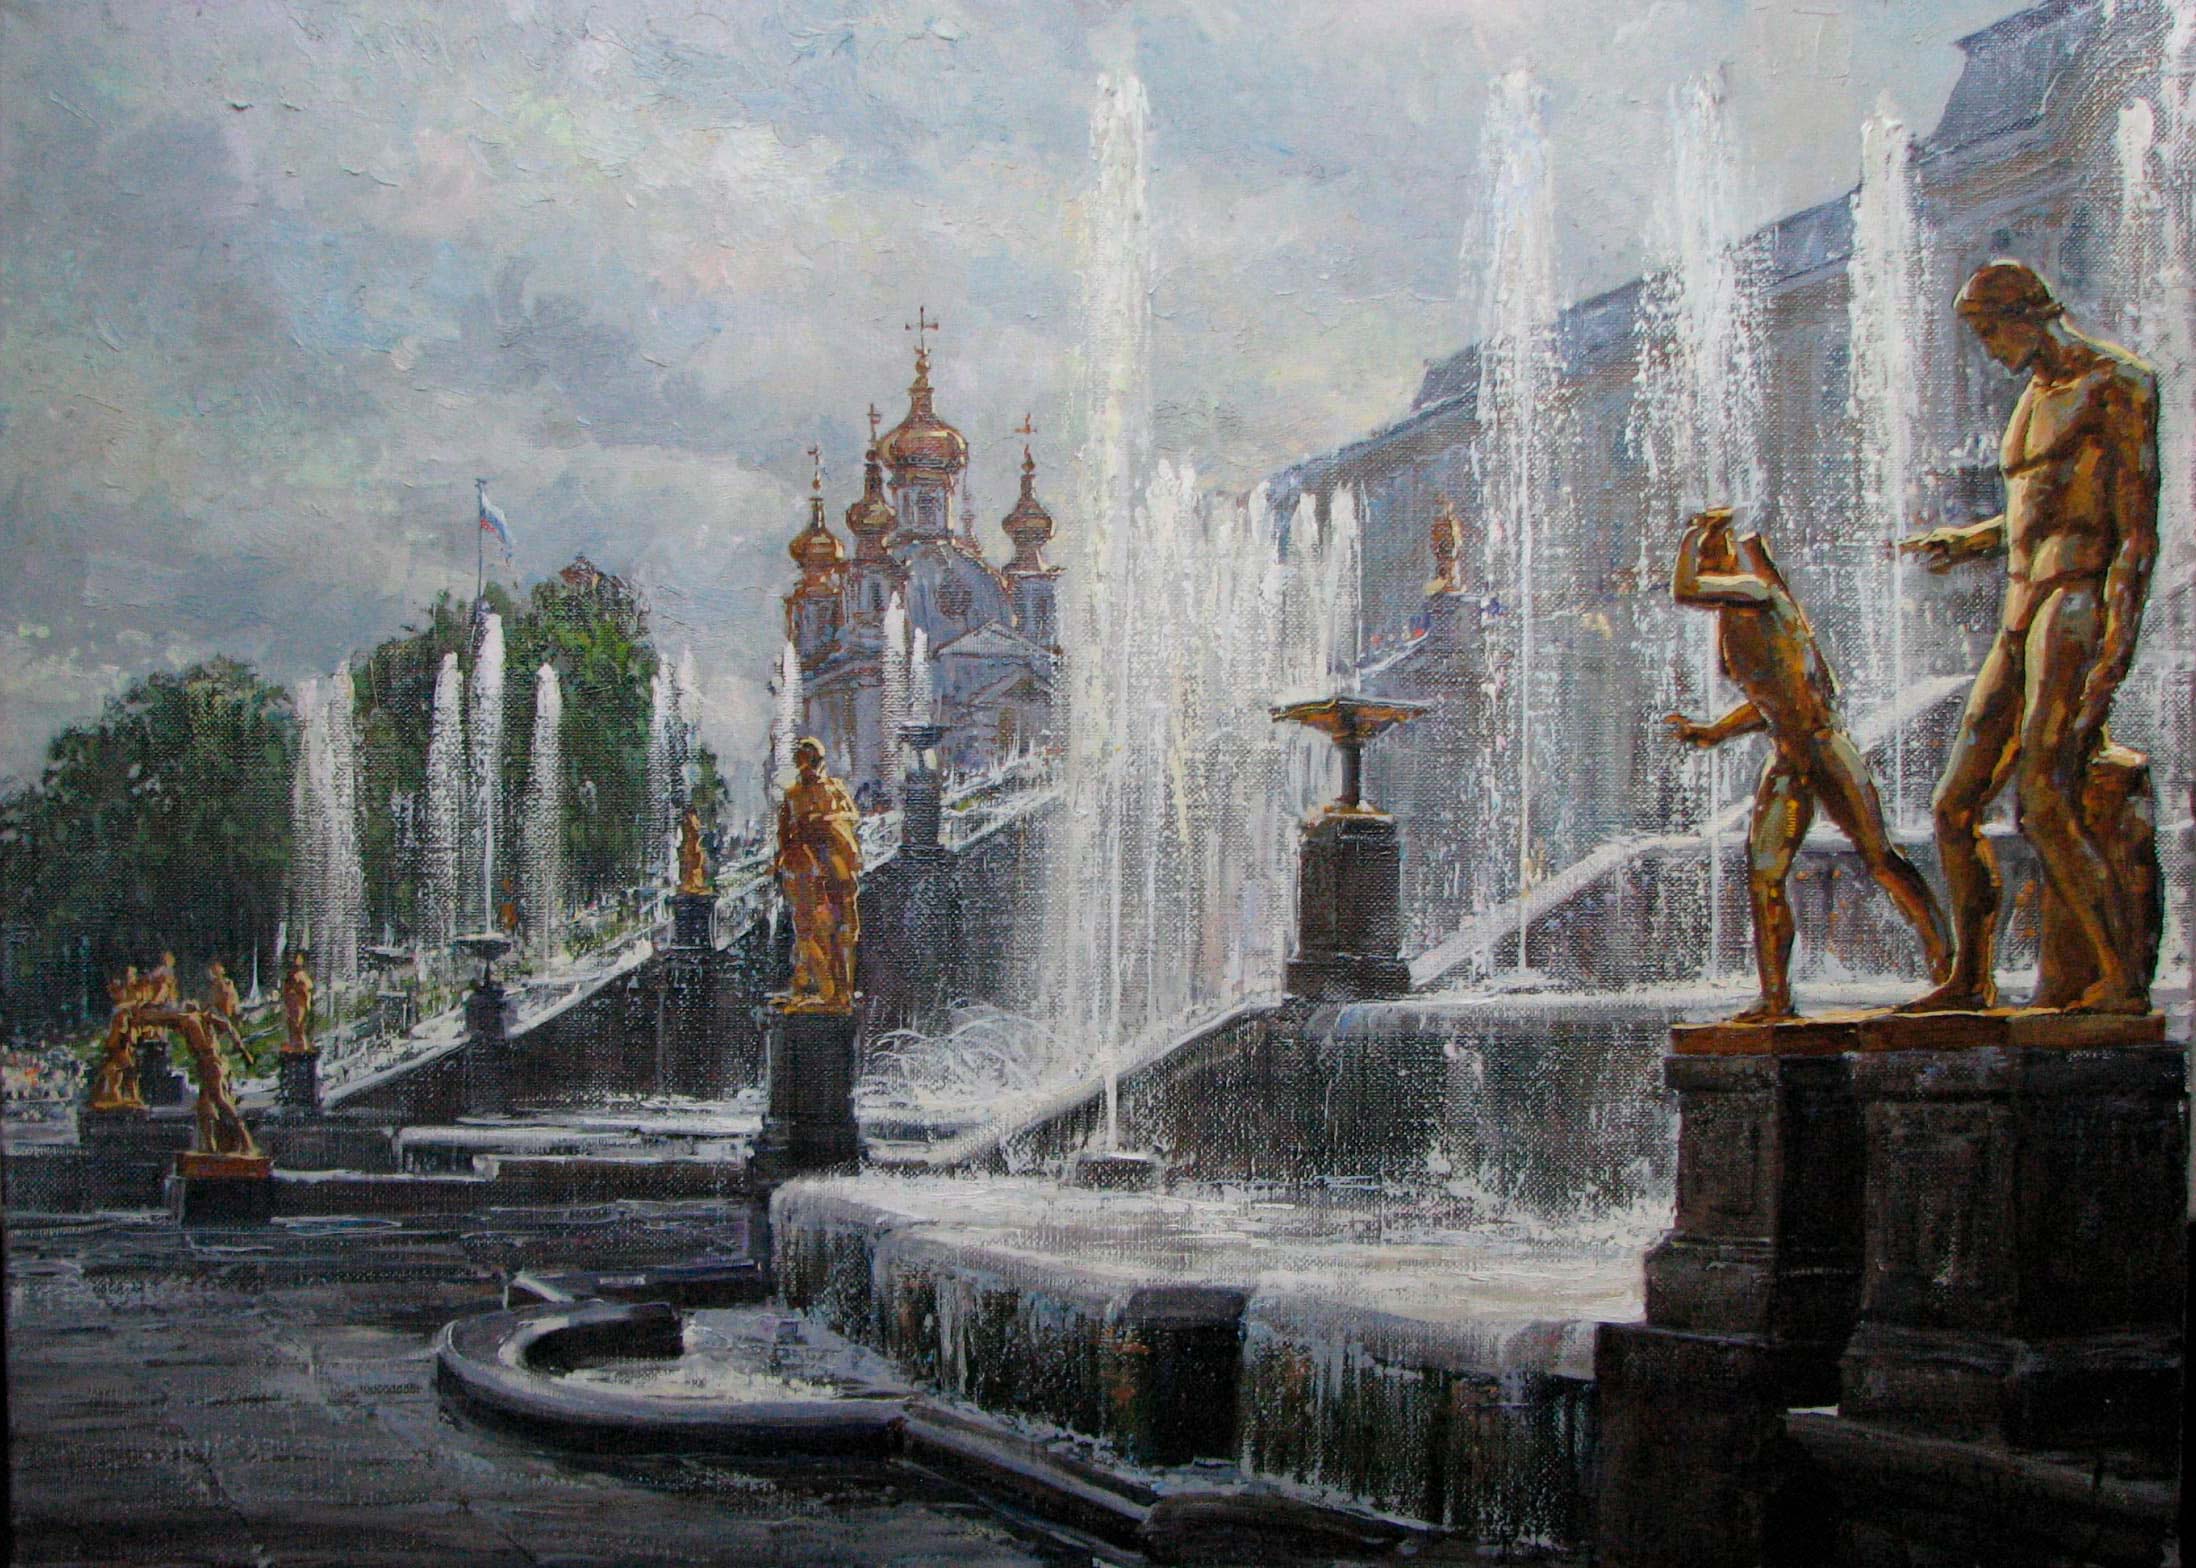  Fountains - 1, Kirill Malkov, Buy the painting Oil